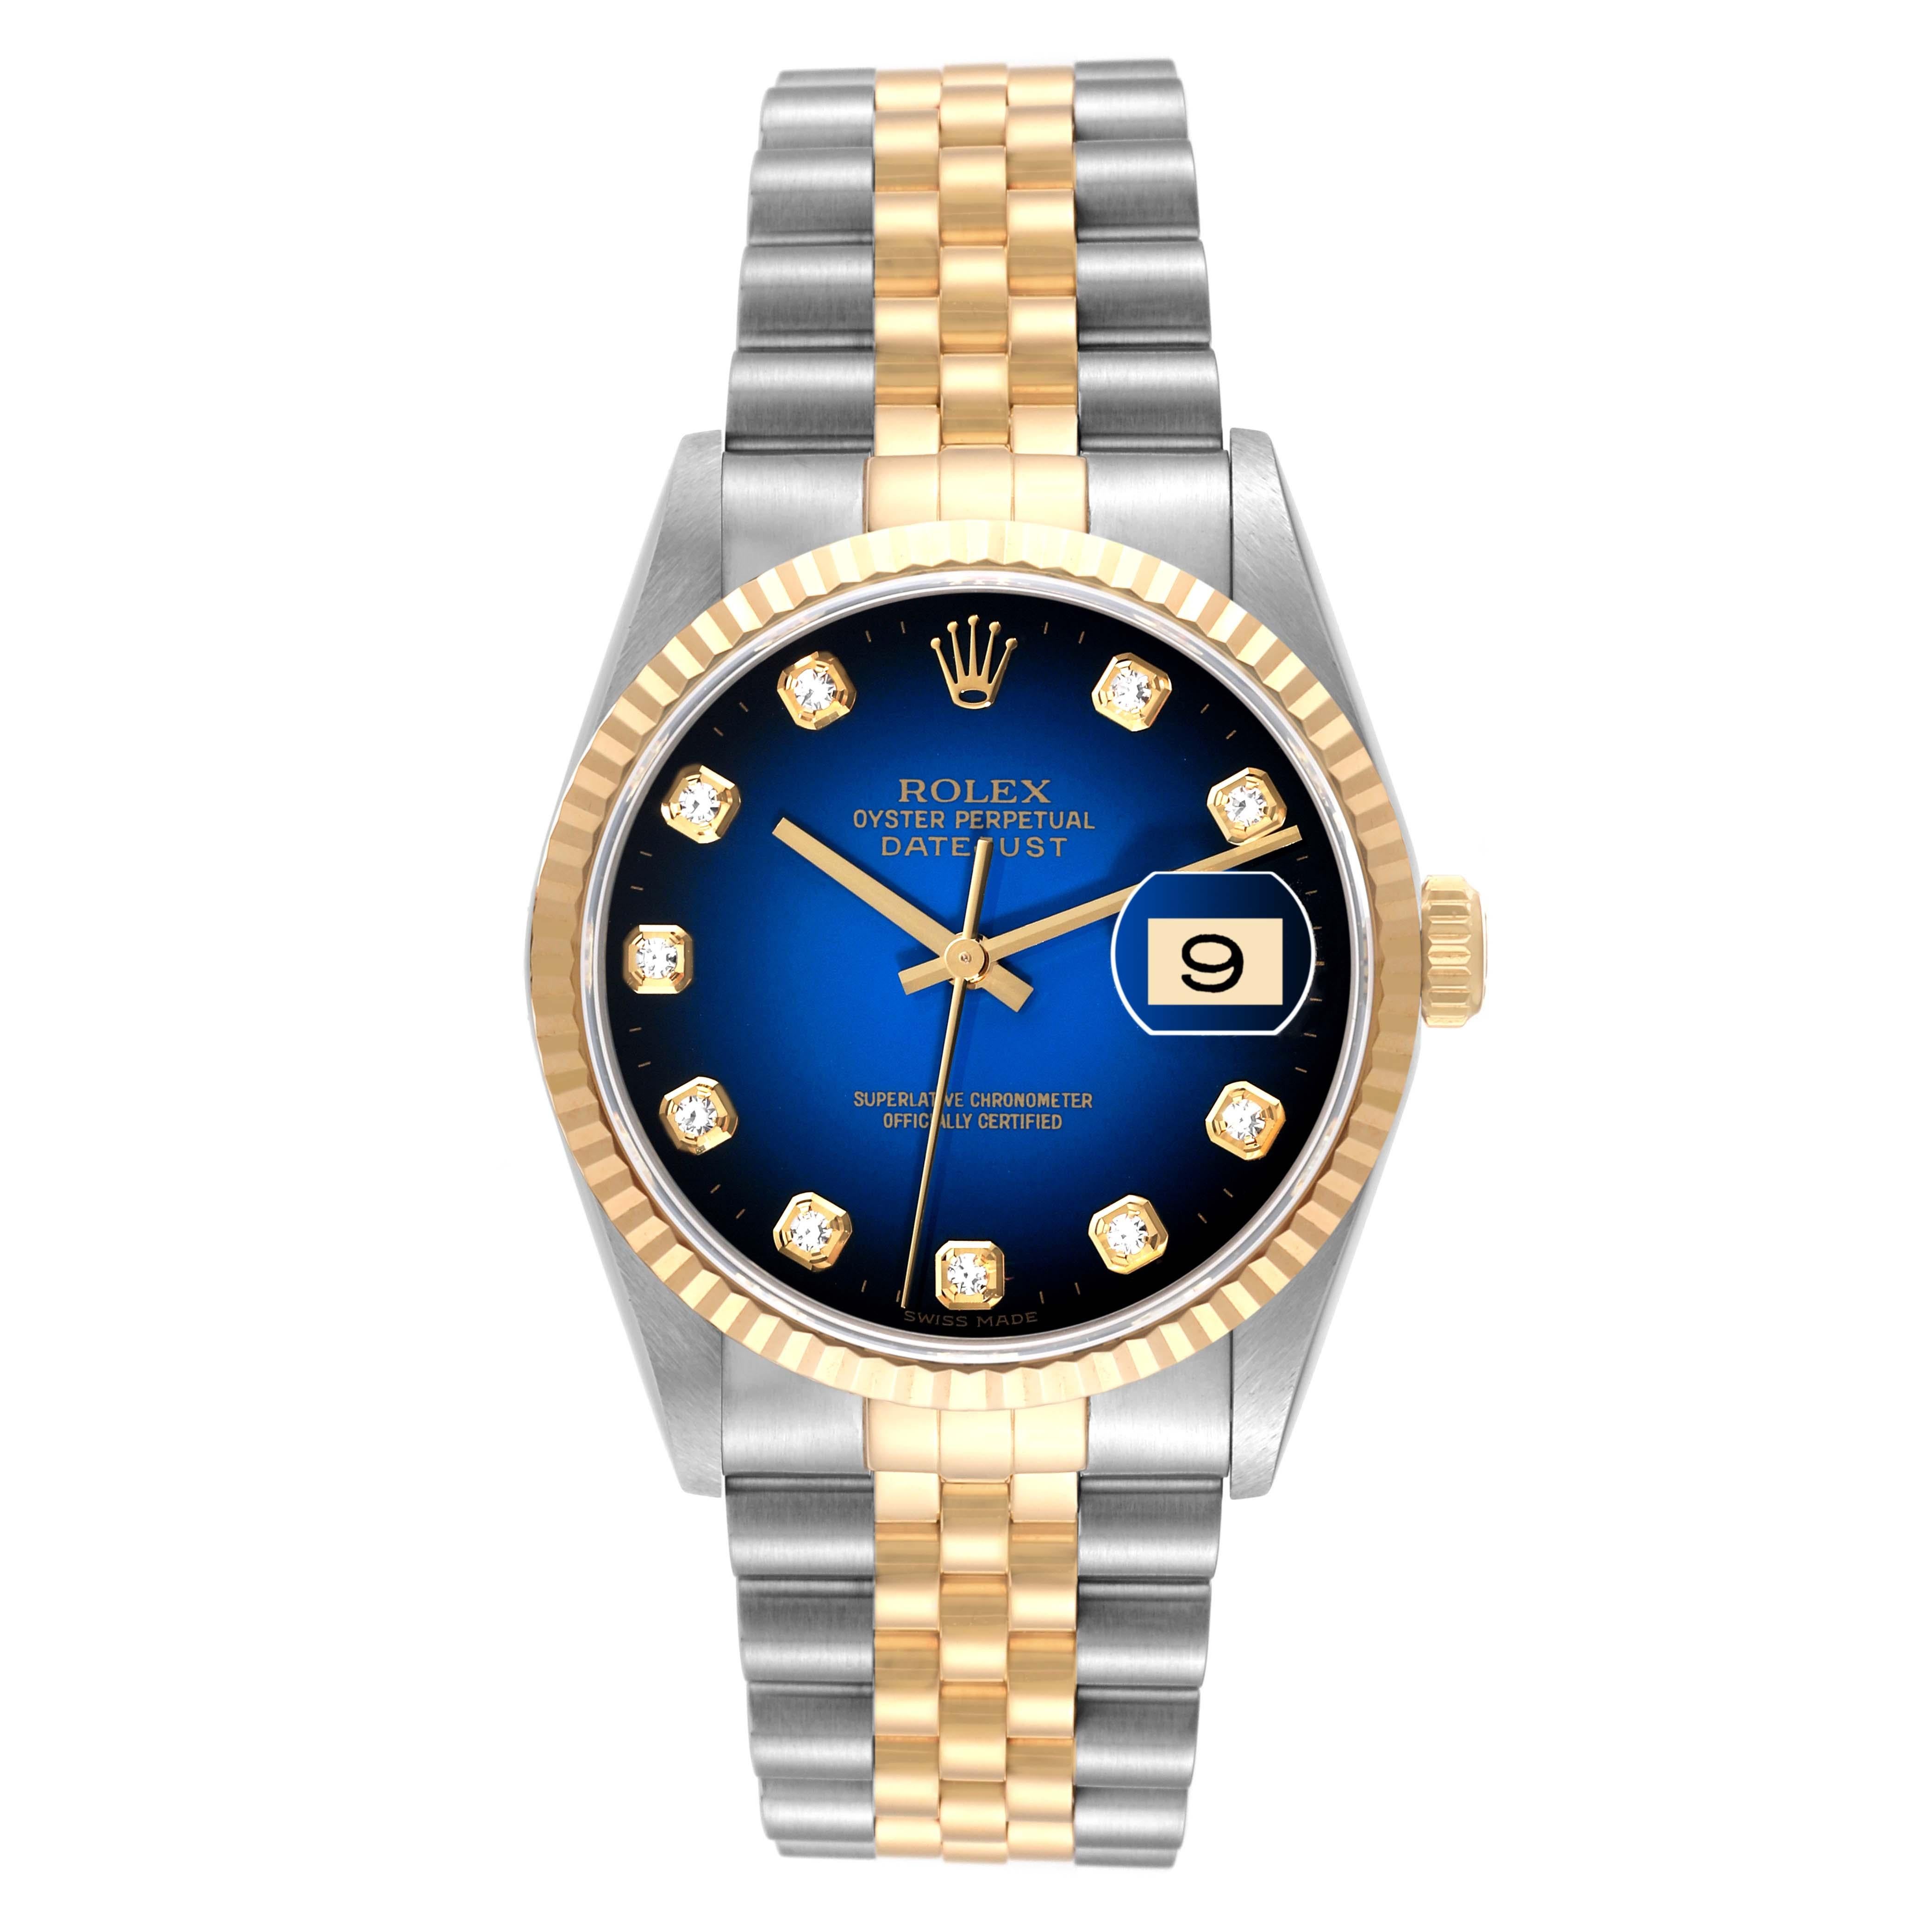 Rolex Datejust Blue Diamond Dial Steel Yellow Gold Mens Watch 16233 Box Papers. Officially certified chronometer automatic self-winding movement. Stainless steel case 36.0 mm in diameter.  Rolex logo on an 18K yellow gold crown. 18k yellow gold